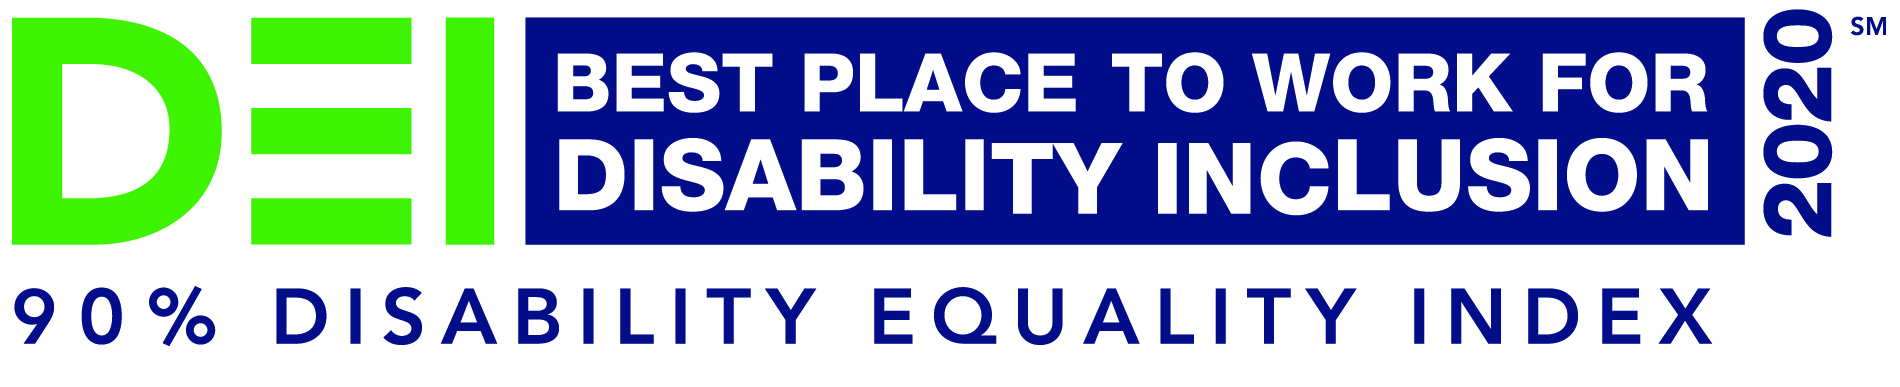 Whirlpool Corporation Disability Equality Index